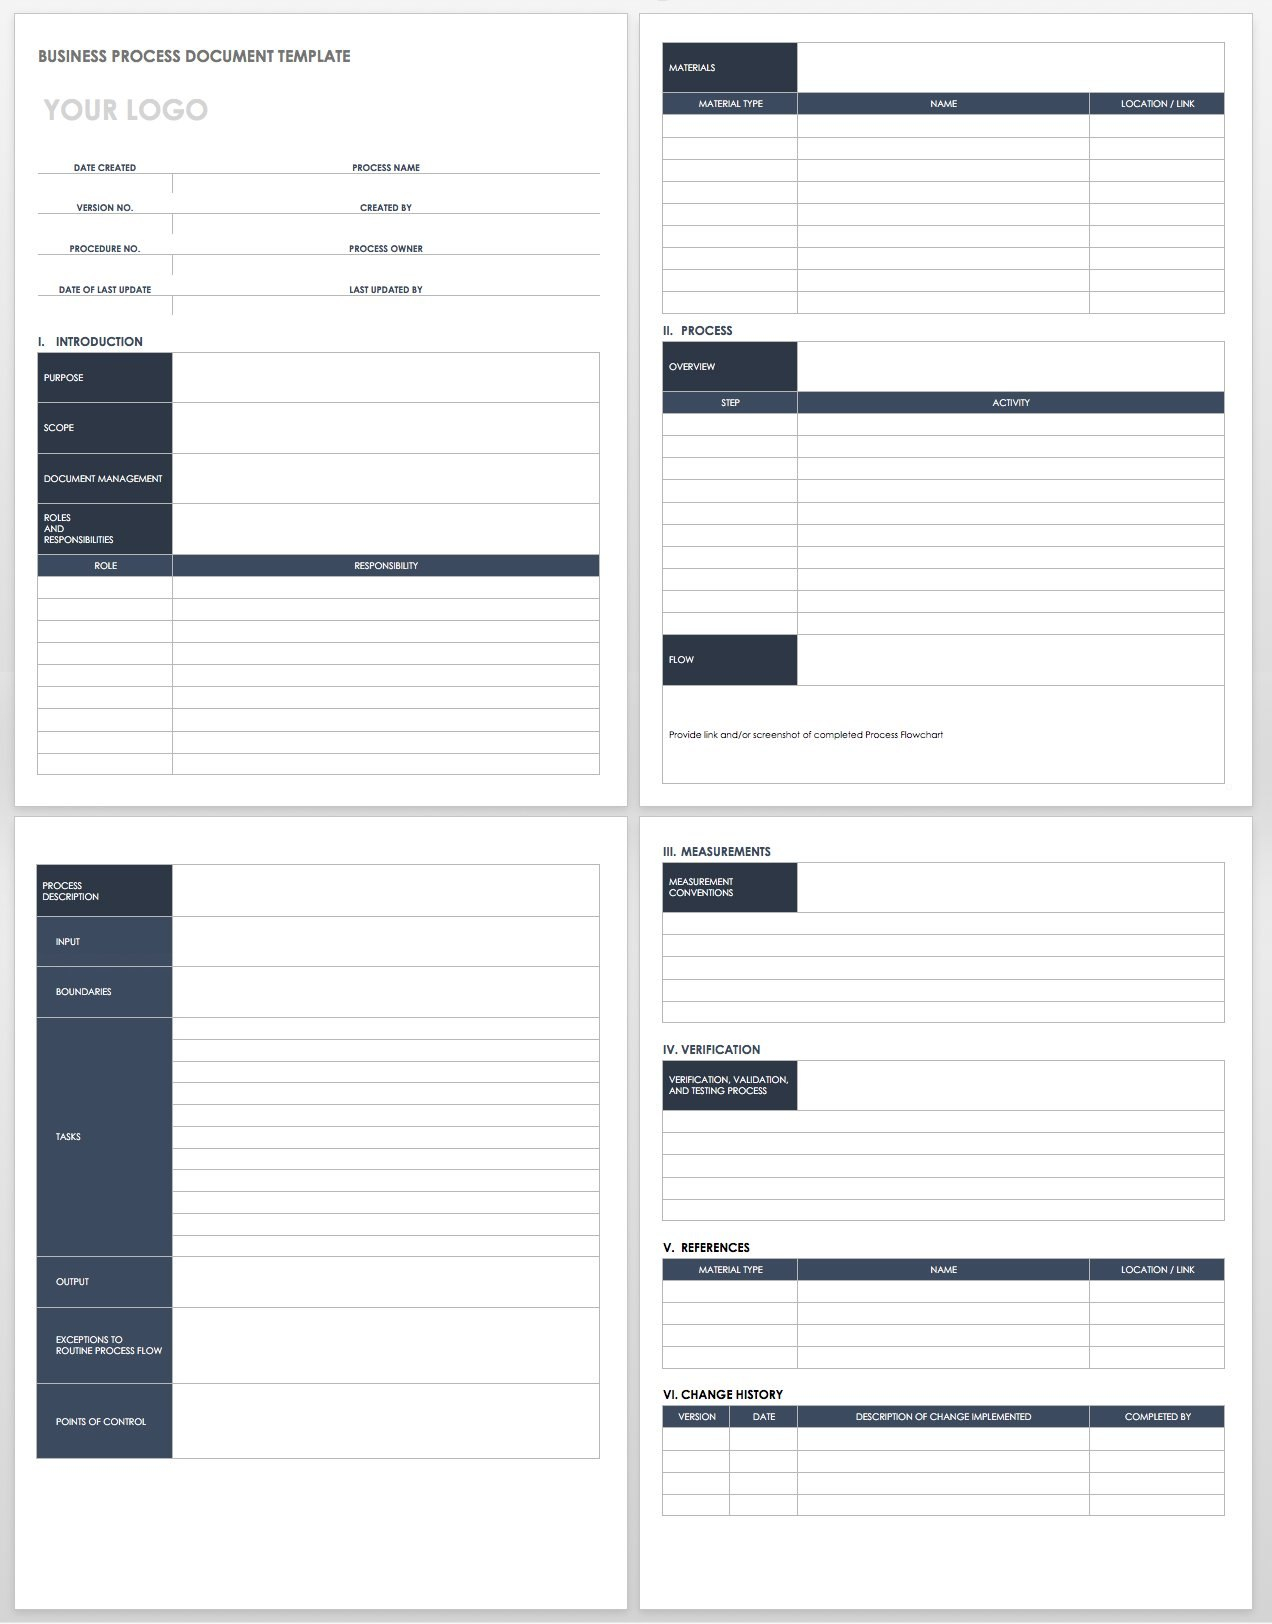 Free Process Document Templates  Smartsheet for Business Process Document Template